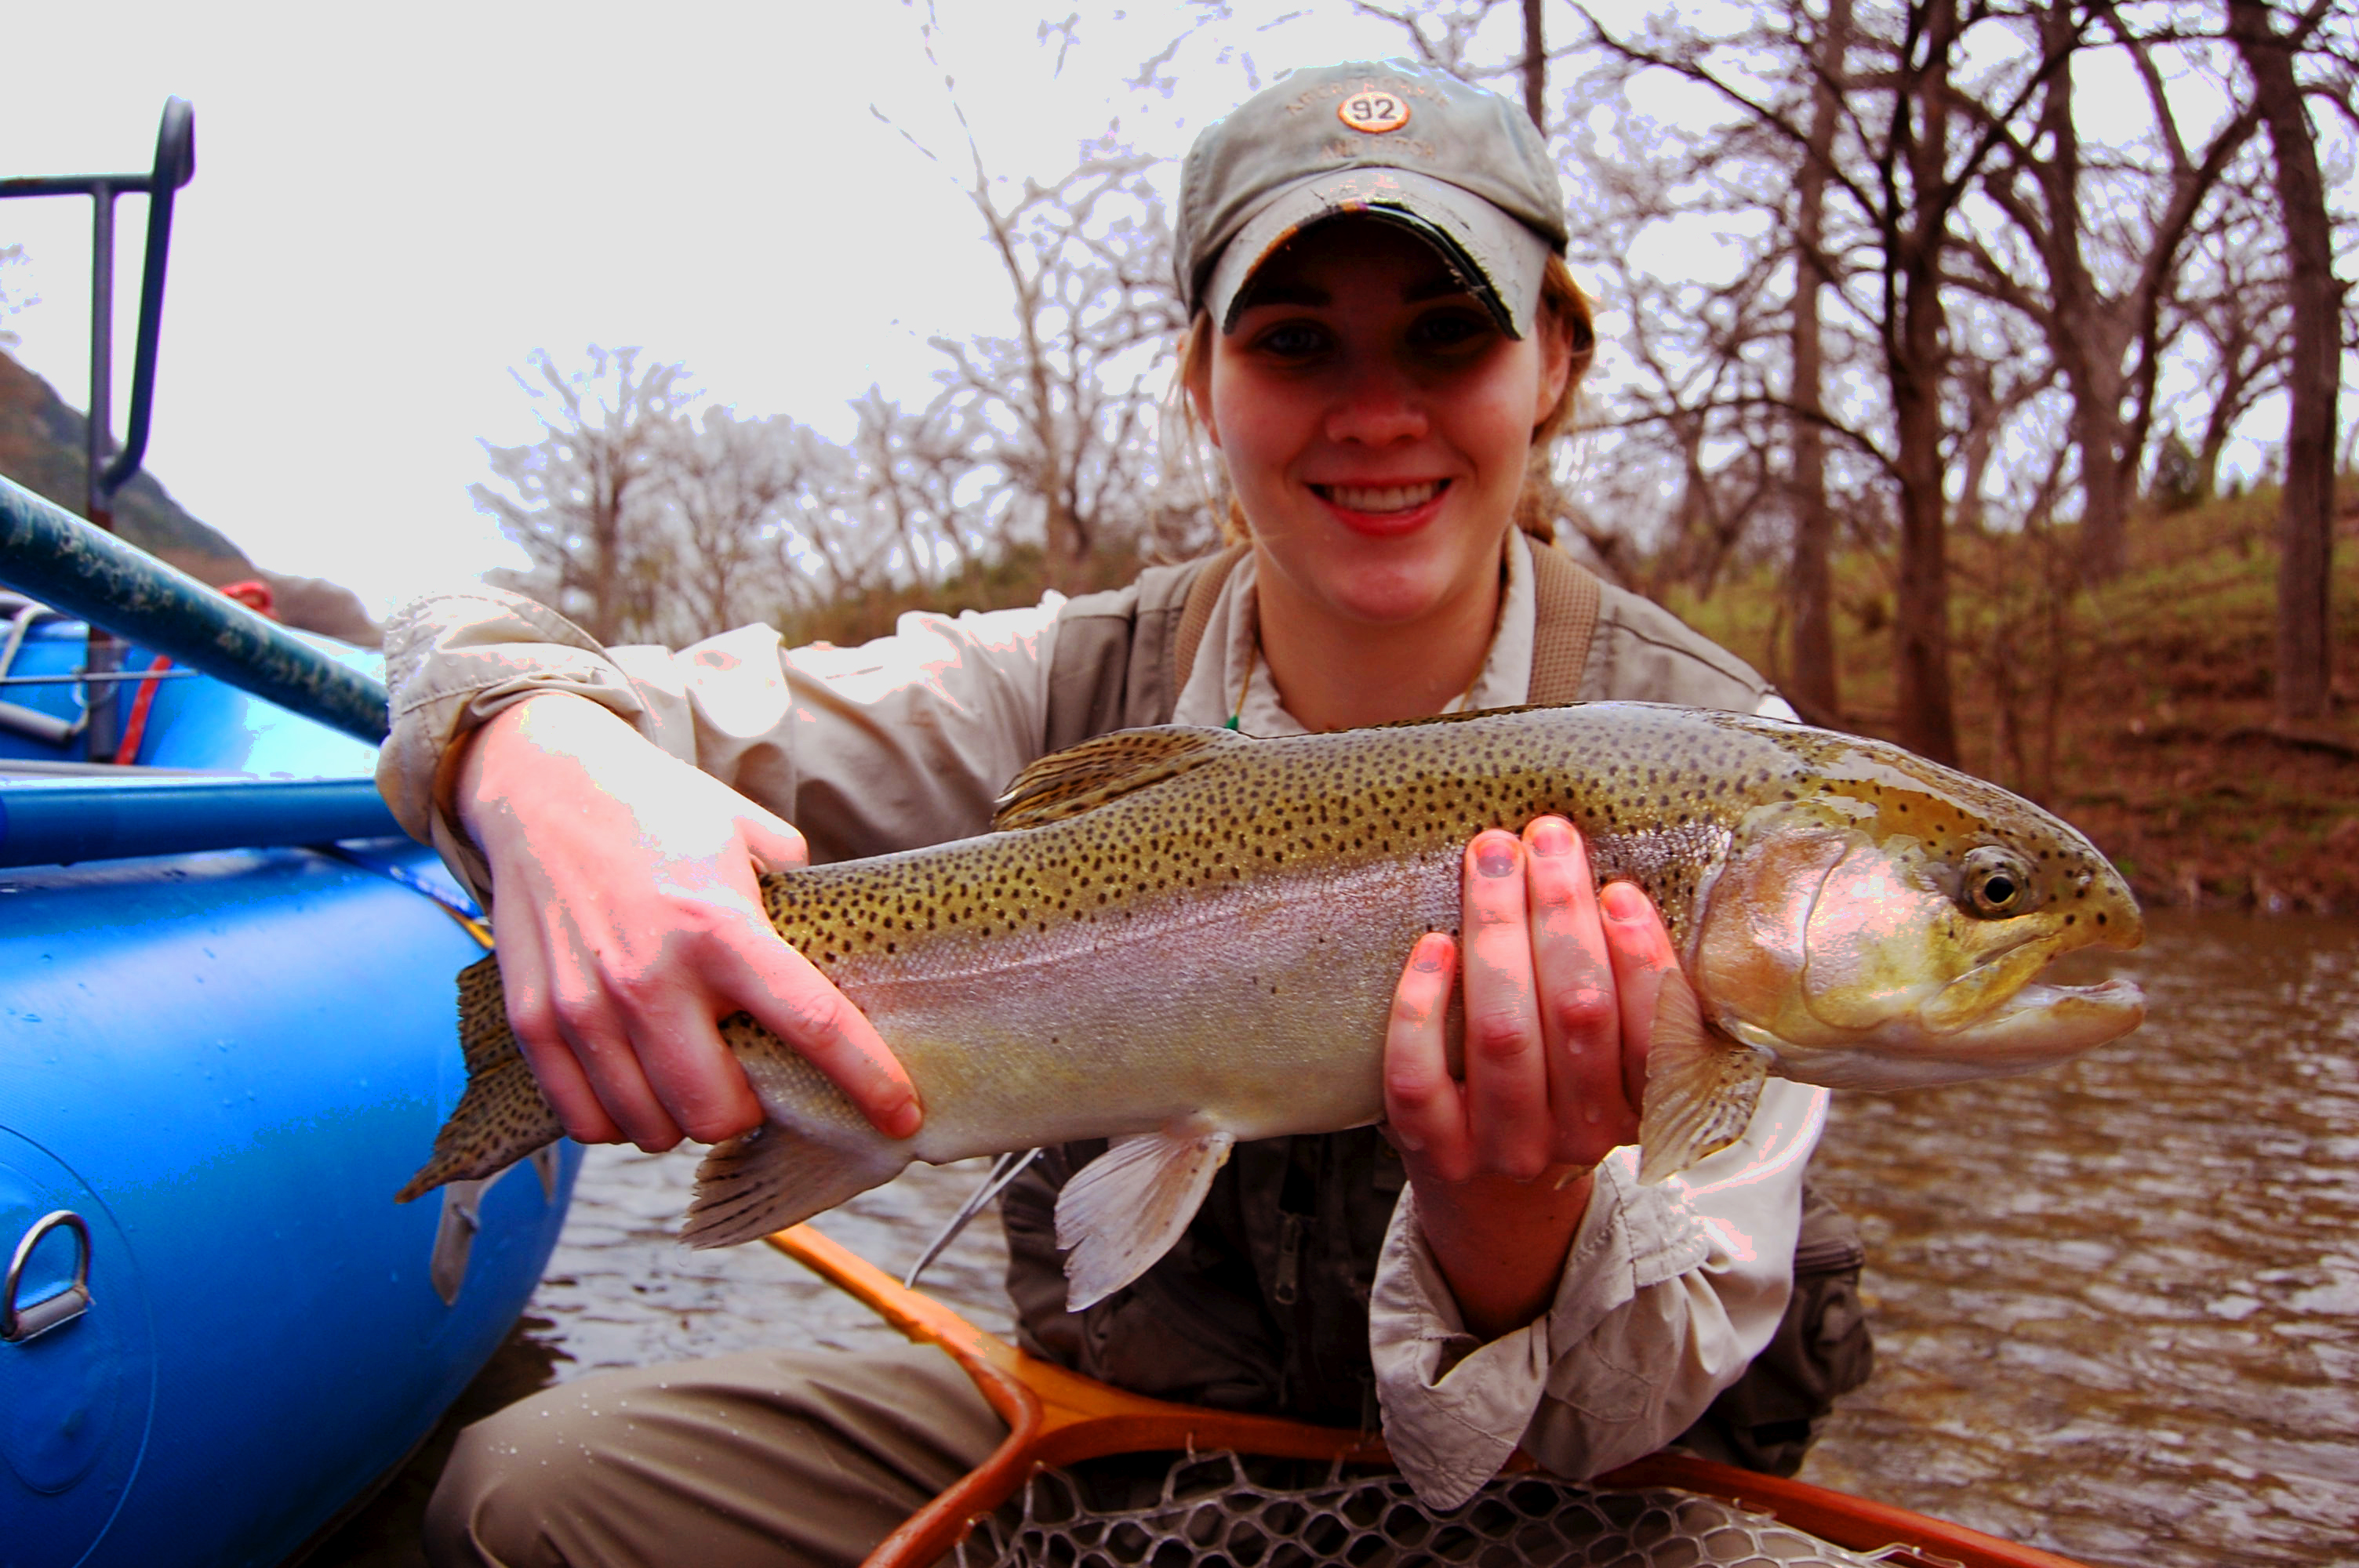 Guadalupe Trout Fly Fishing Guides near Austin and San Antonio Texas